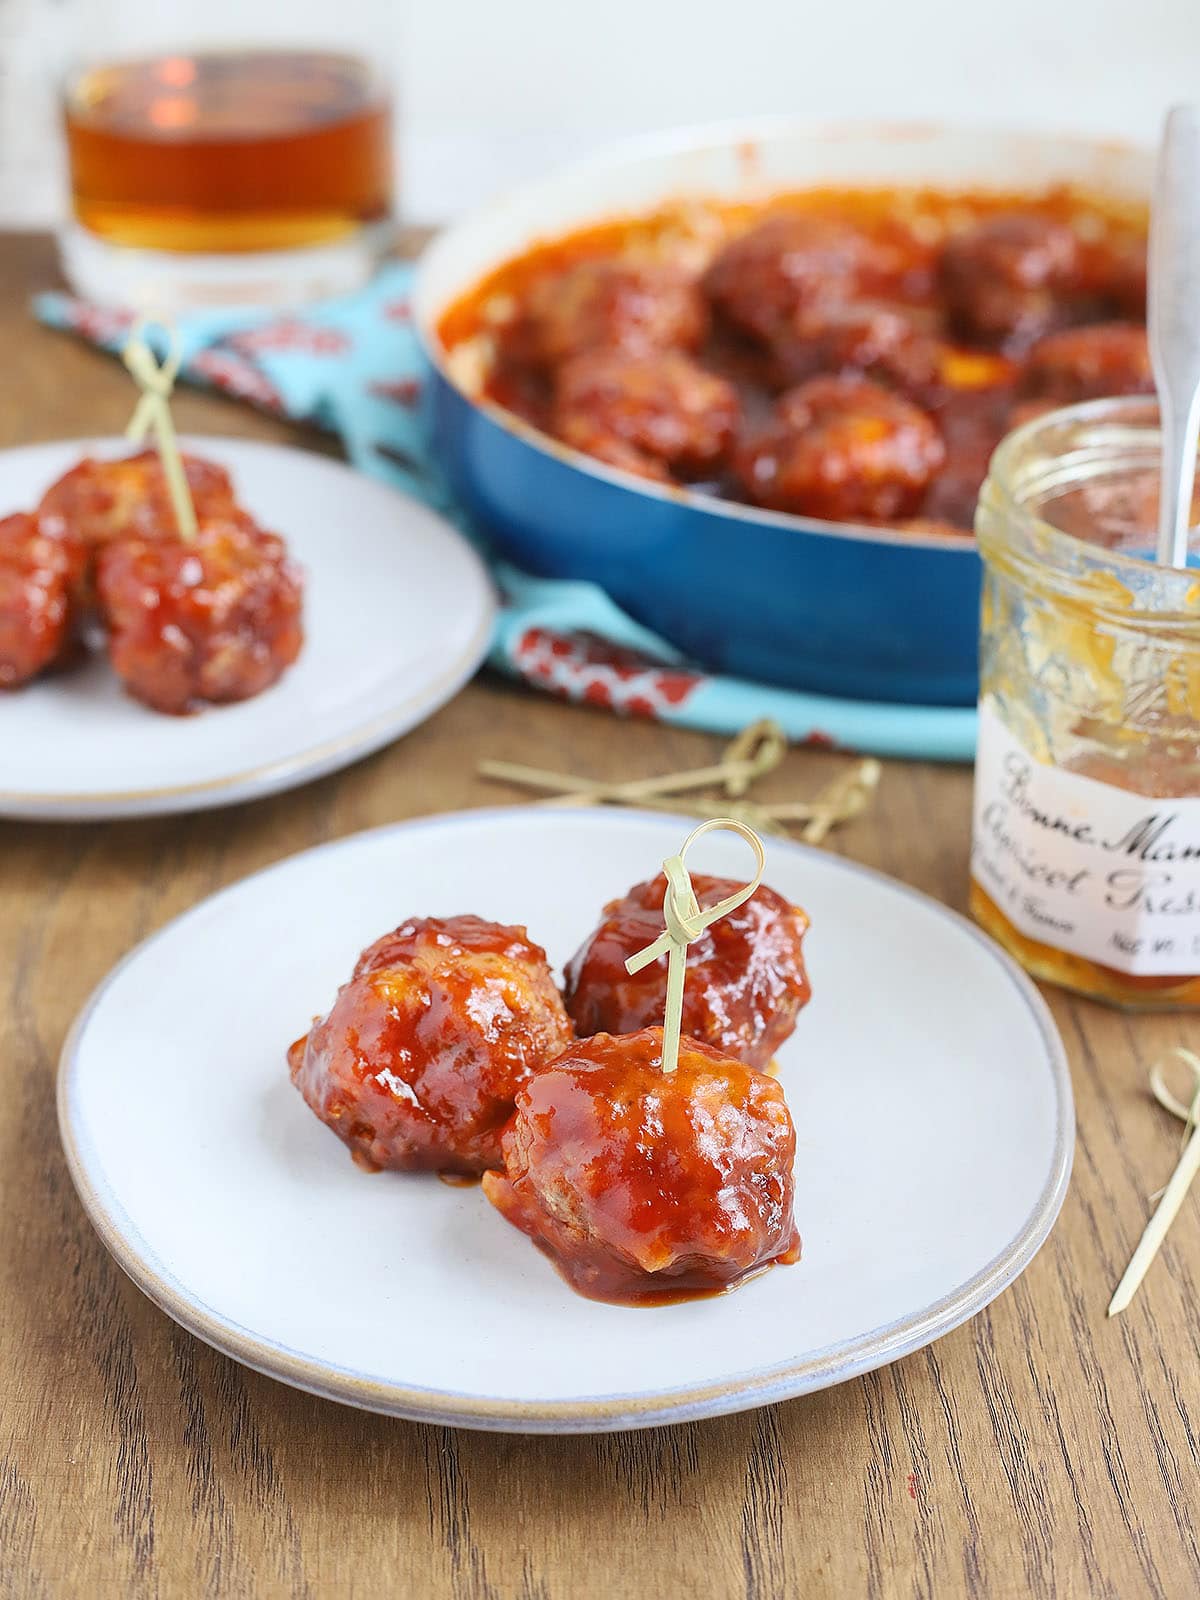 three glazed meatballs on a plate with a pan of meatballs in the background